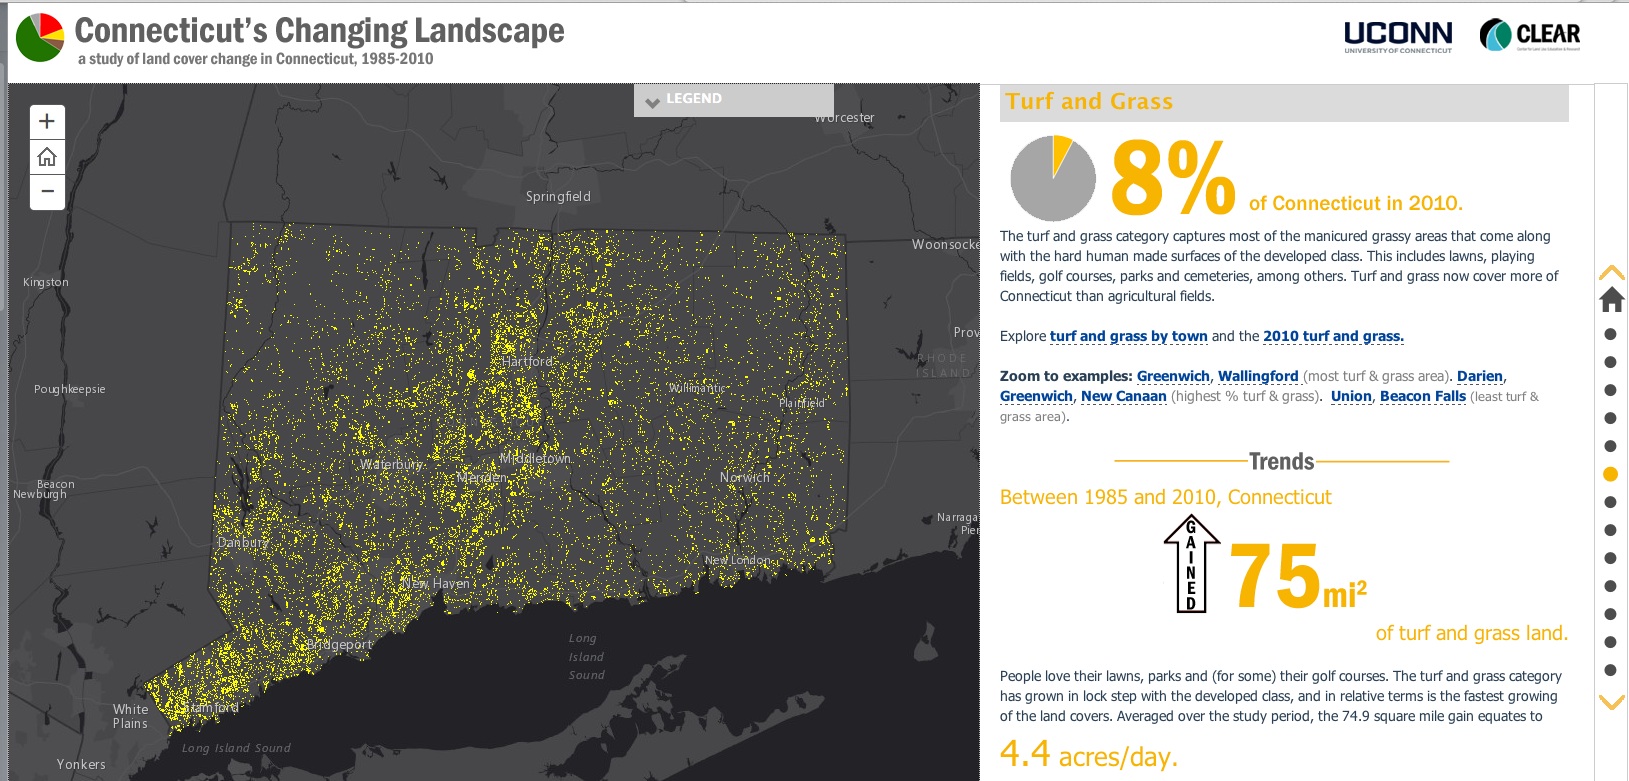 One page of Connecticut's Changing Landscape, linked to this award-winning resource that makes an incredible amount of data understandable with visual information.